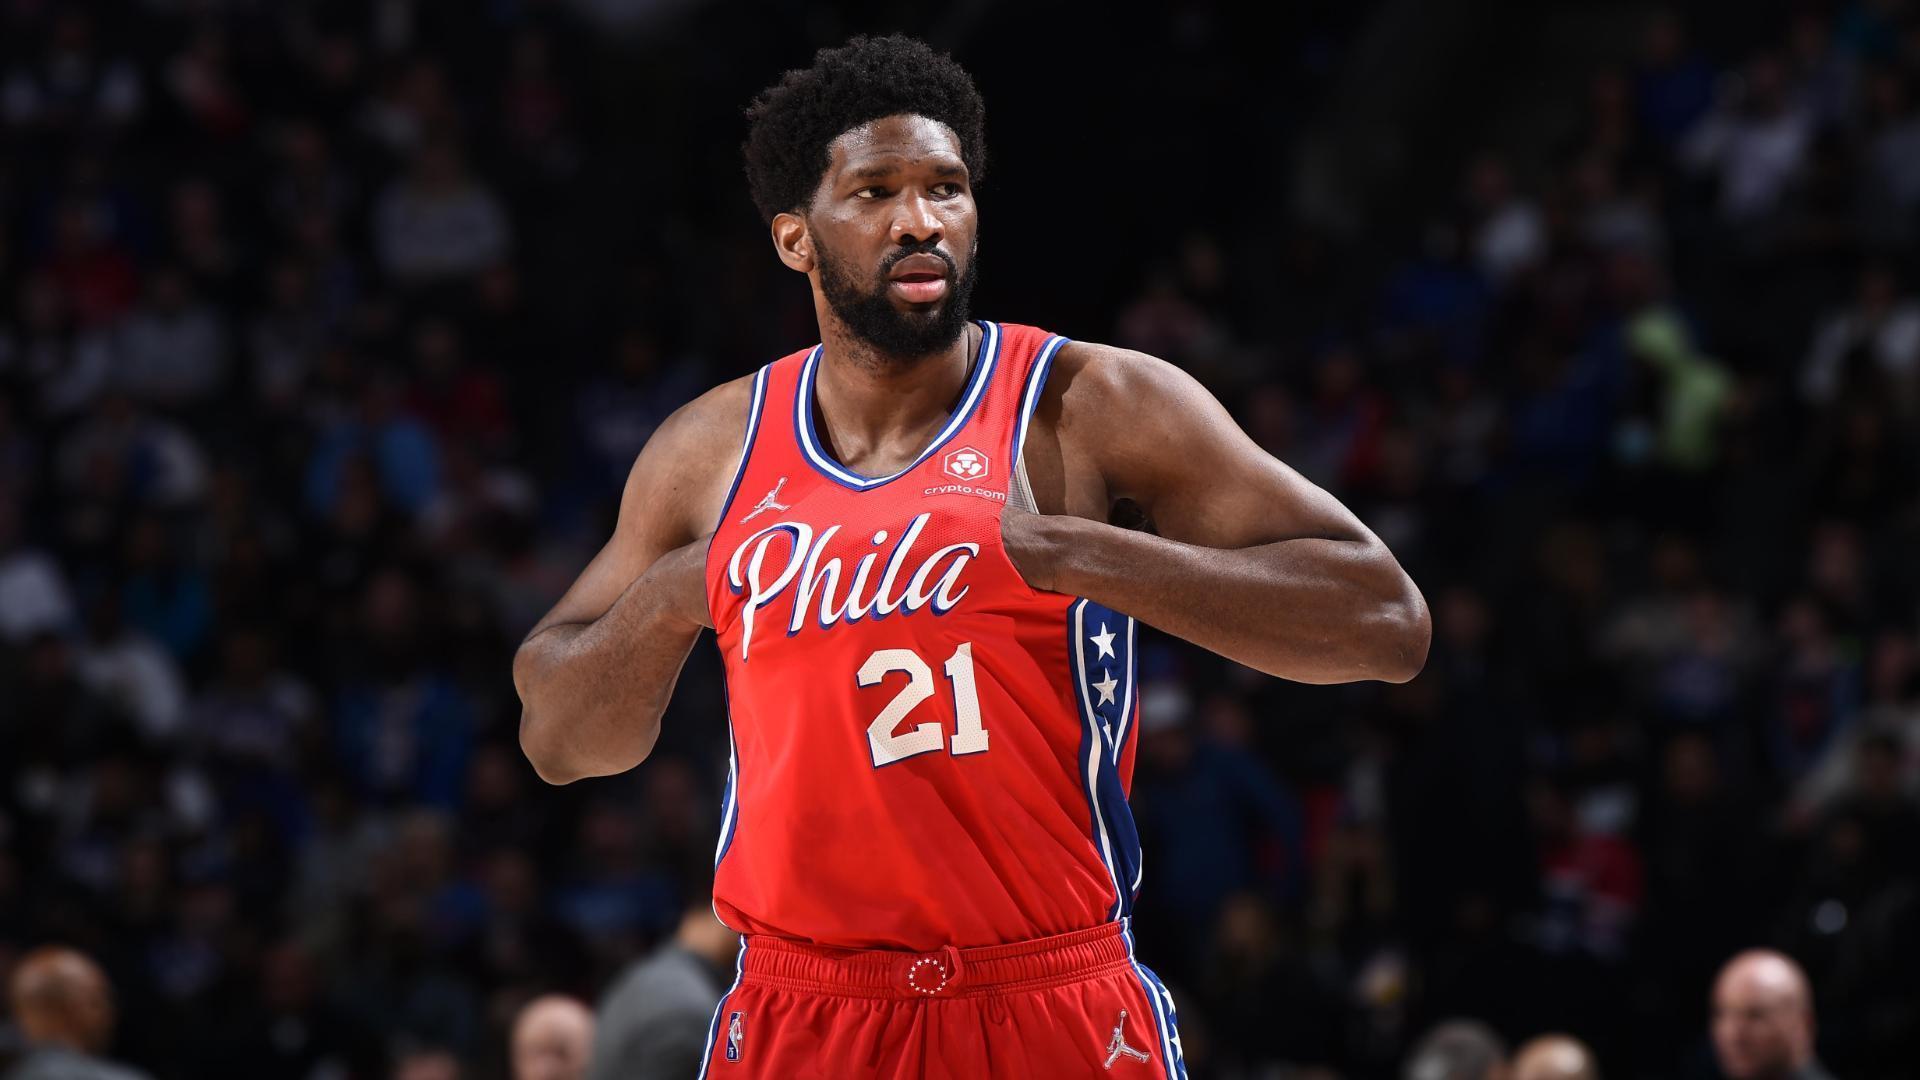 Embiid has a huge game against the Pacers